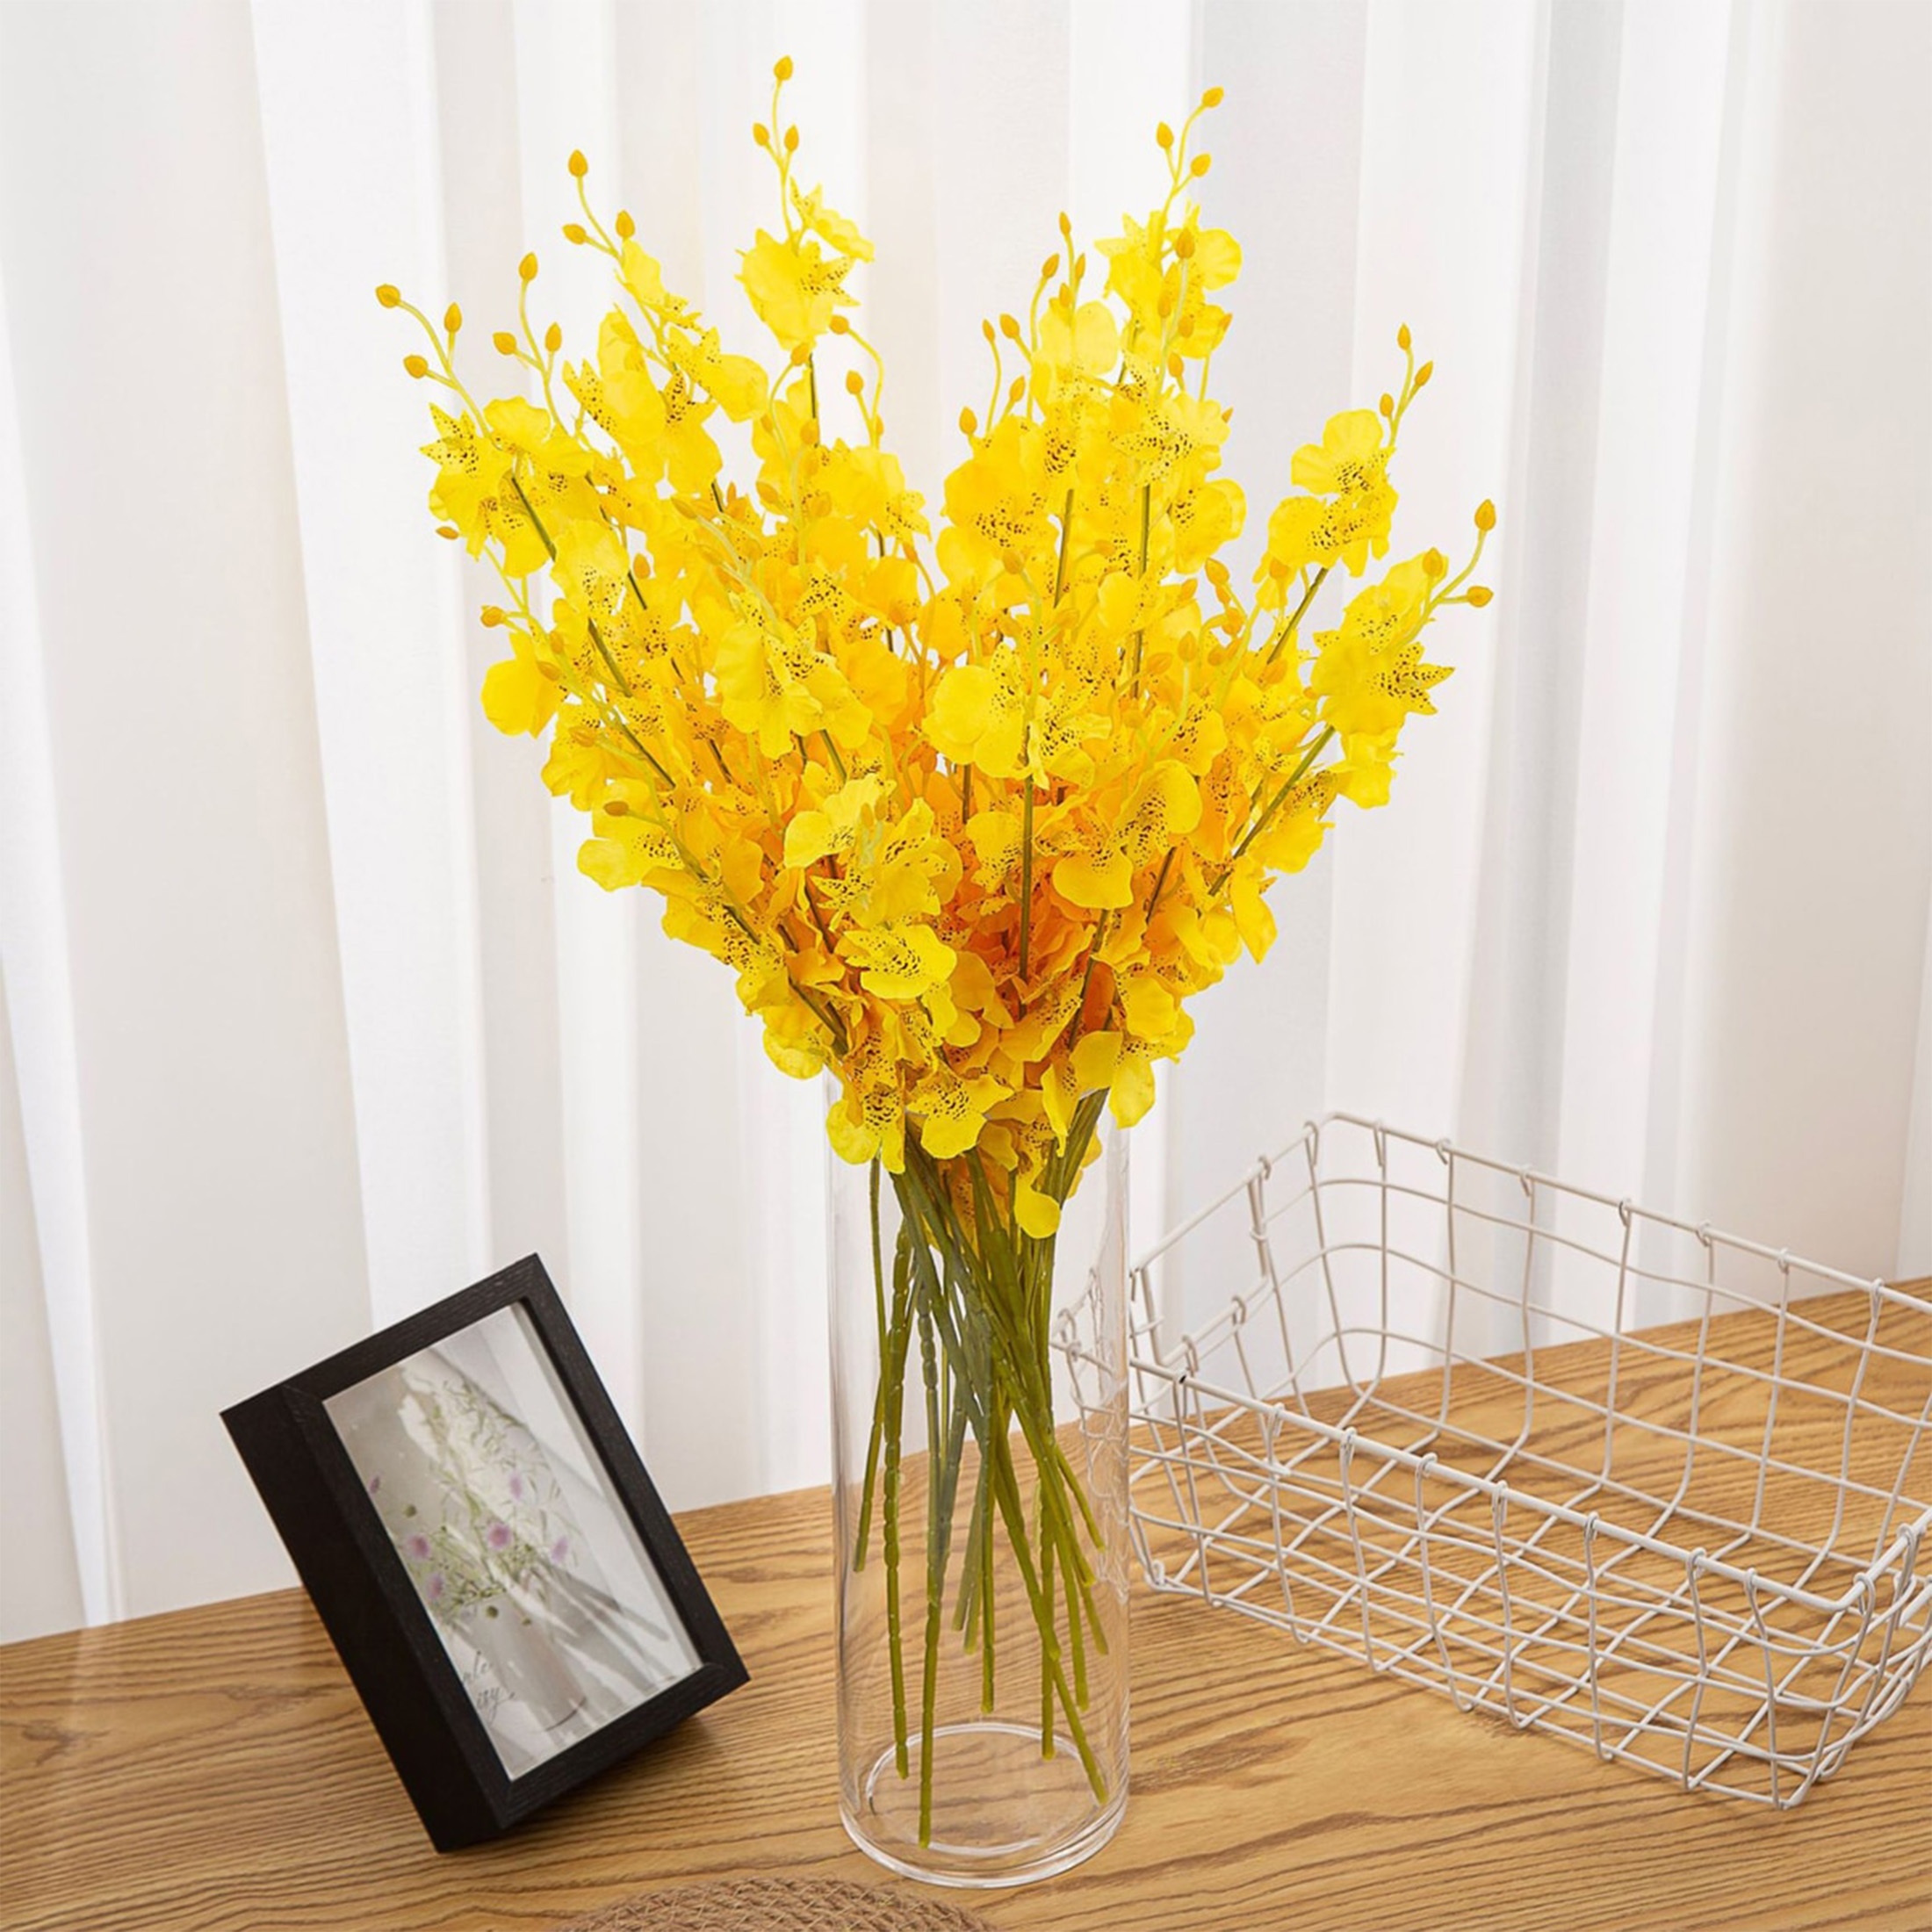 

5pcs, Yellow Artificial Flowers, Faux Flowers For Office House Wedding Diy Decor, Table Centerpieces, Fake Flowers For Vase Decoration, Room Decor, Home Decor